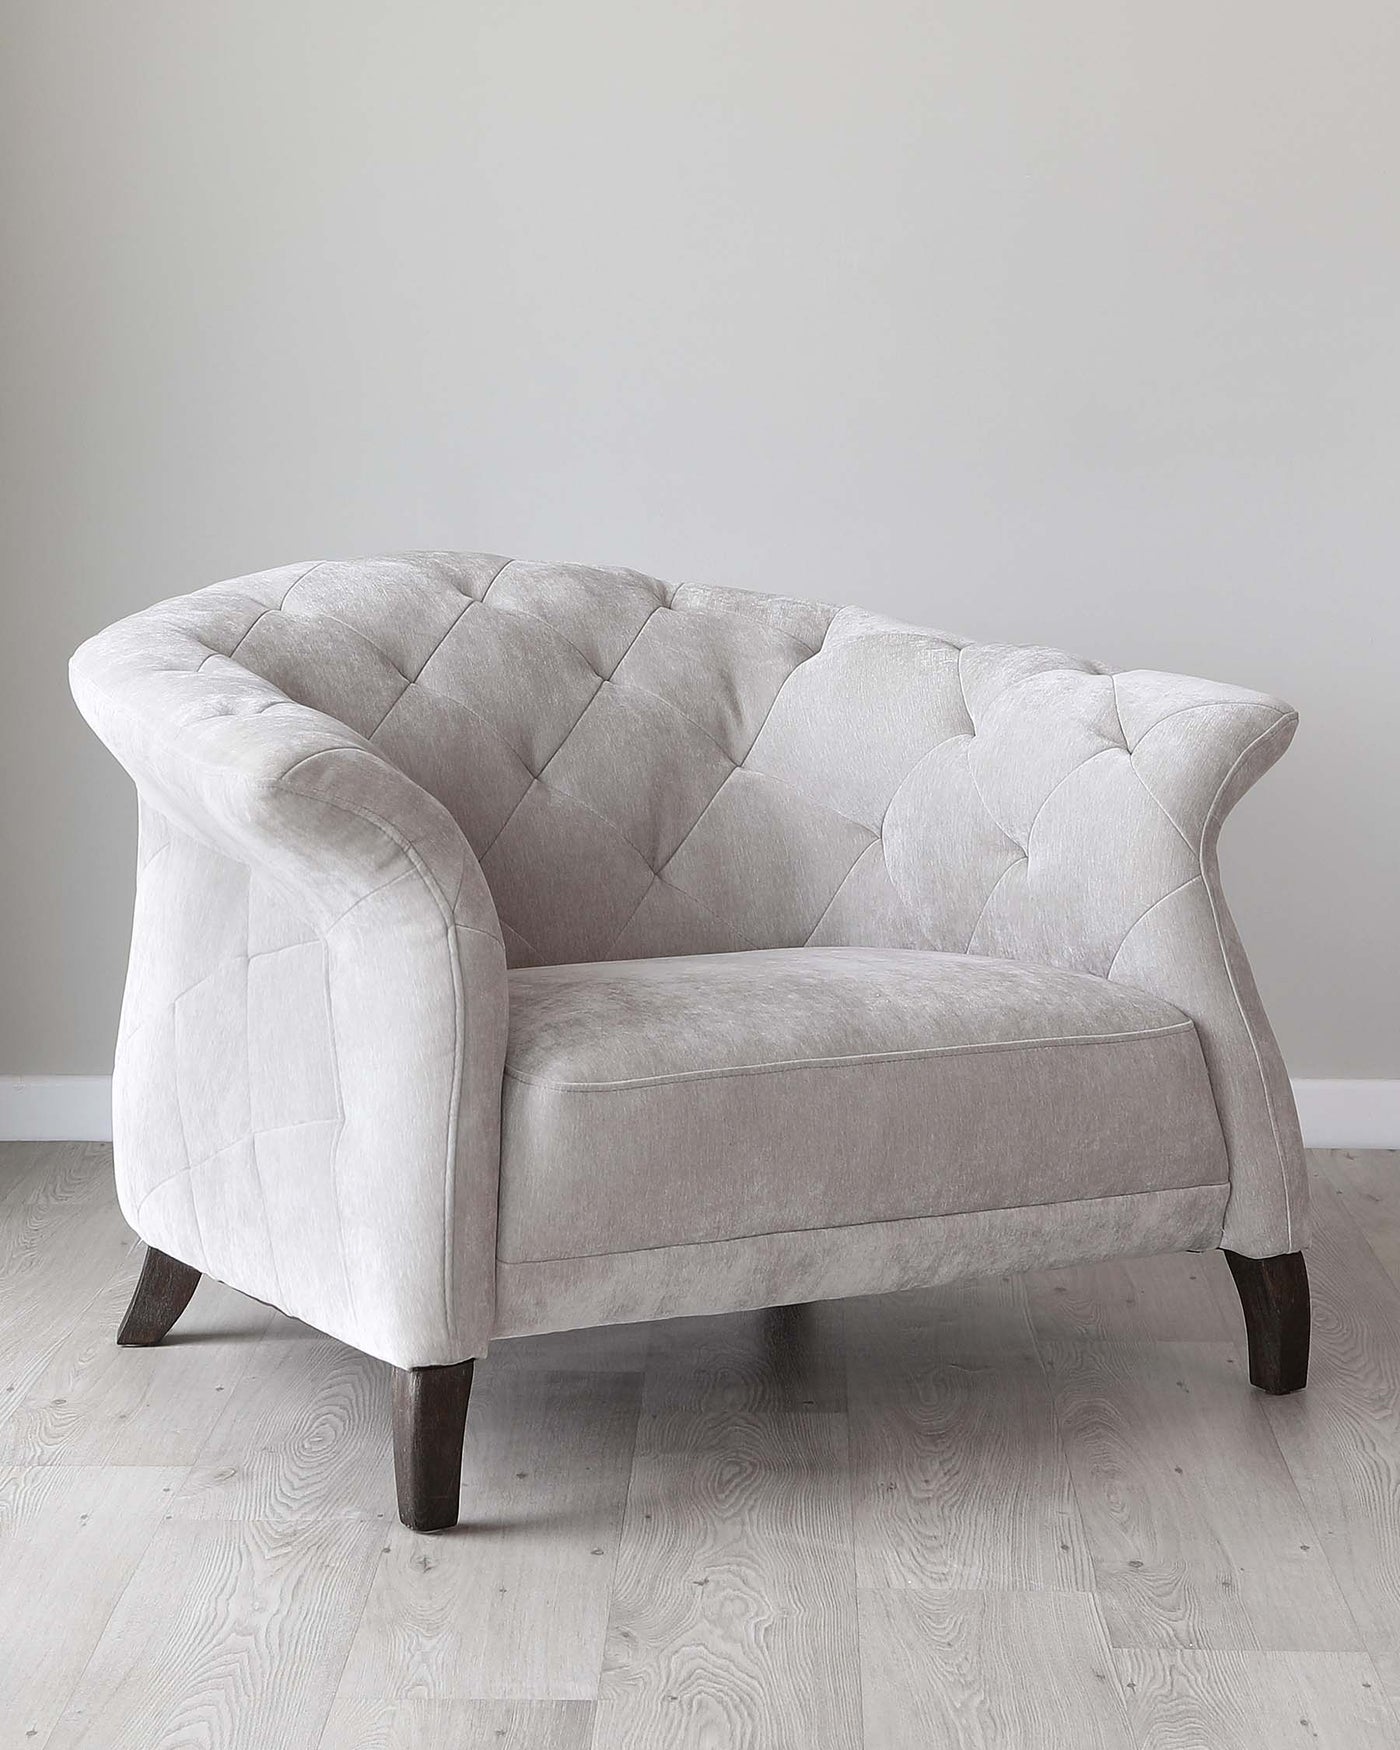 Elegant single-seater fabric sofa with a tufted backrest and curved arm design, featuring a neutral light grey upholstery and dark wooden legs.